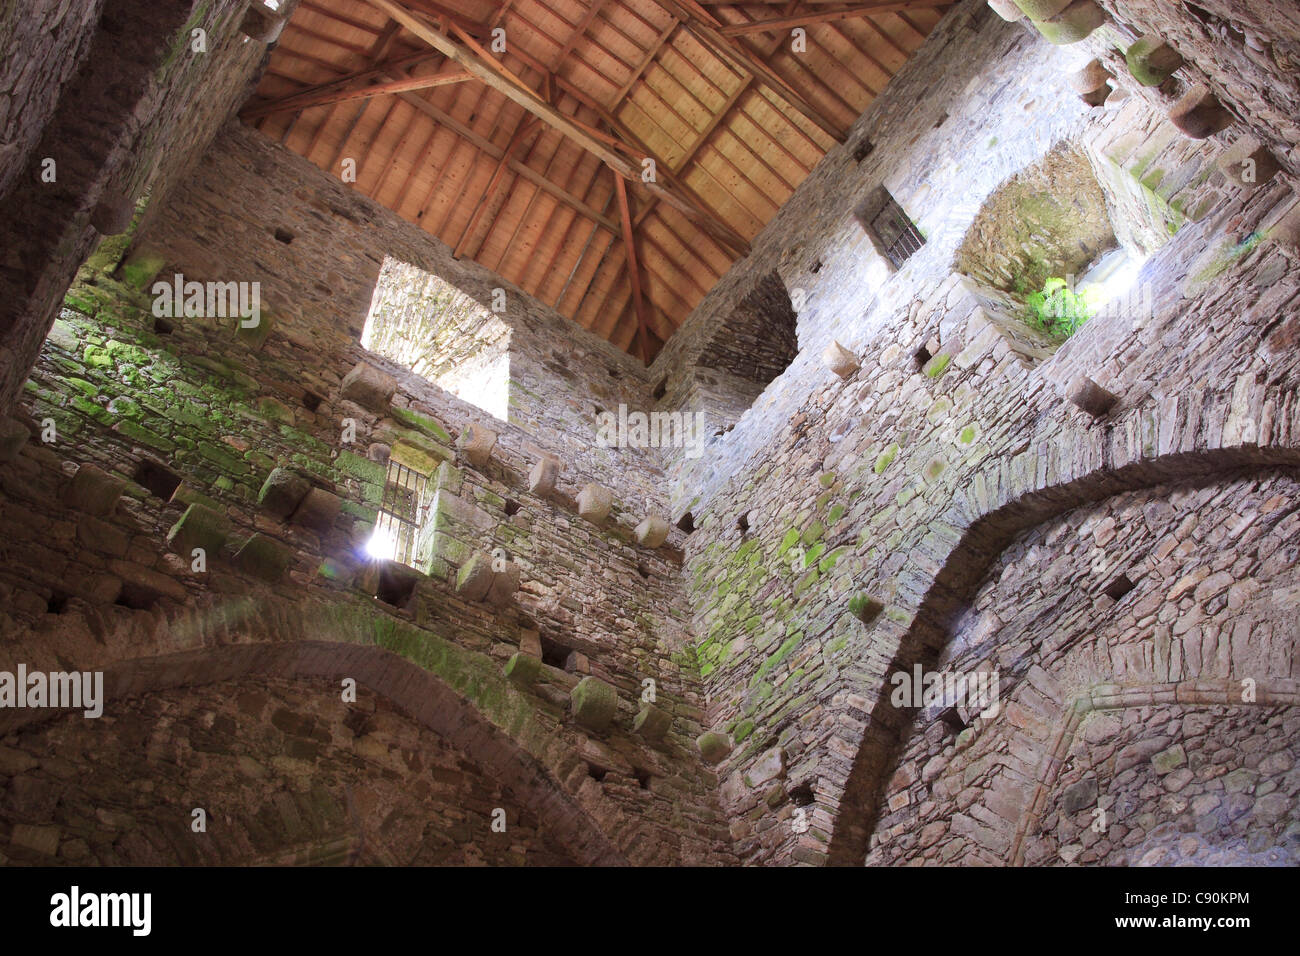 Vaulted Roof, Tintern Abbey Tower, Wexford, Ireland. Stock Photo